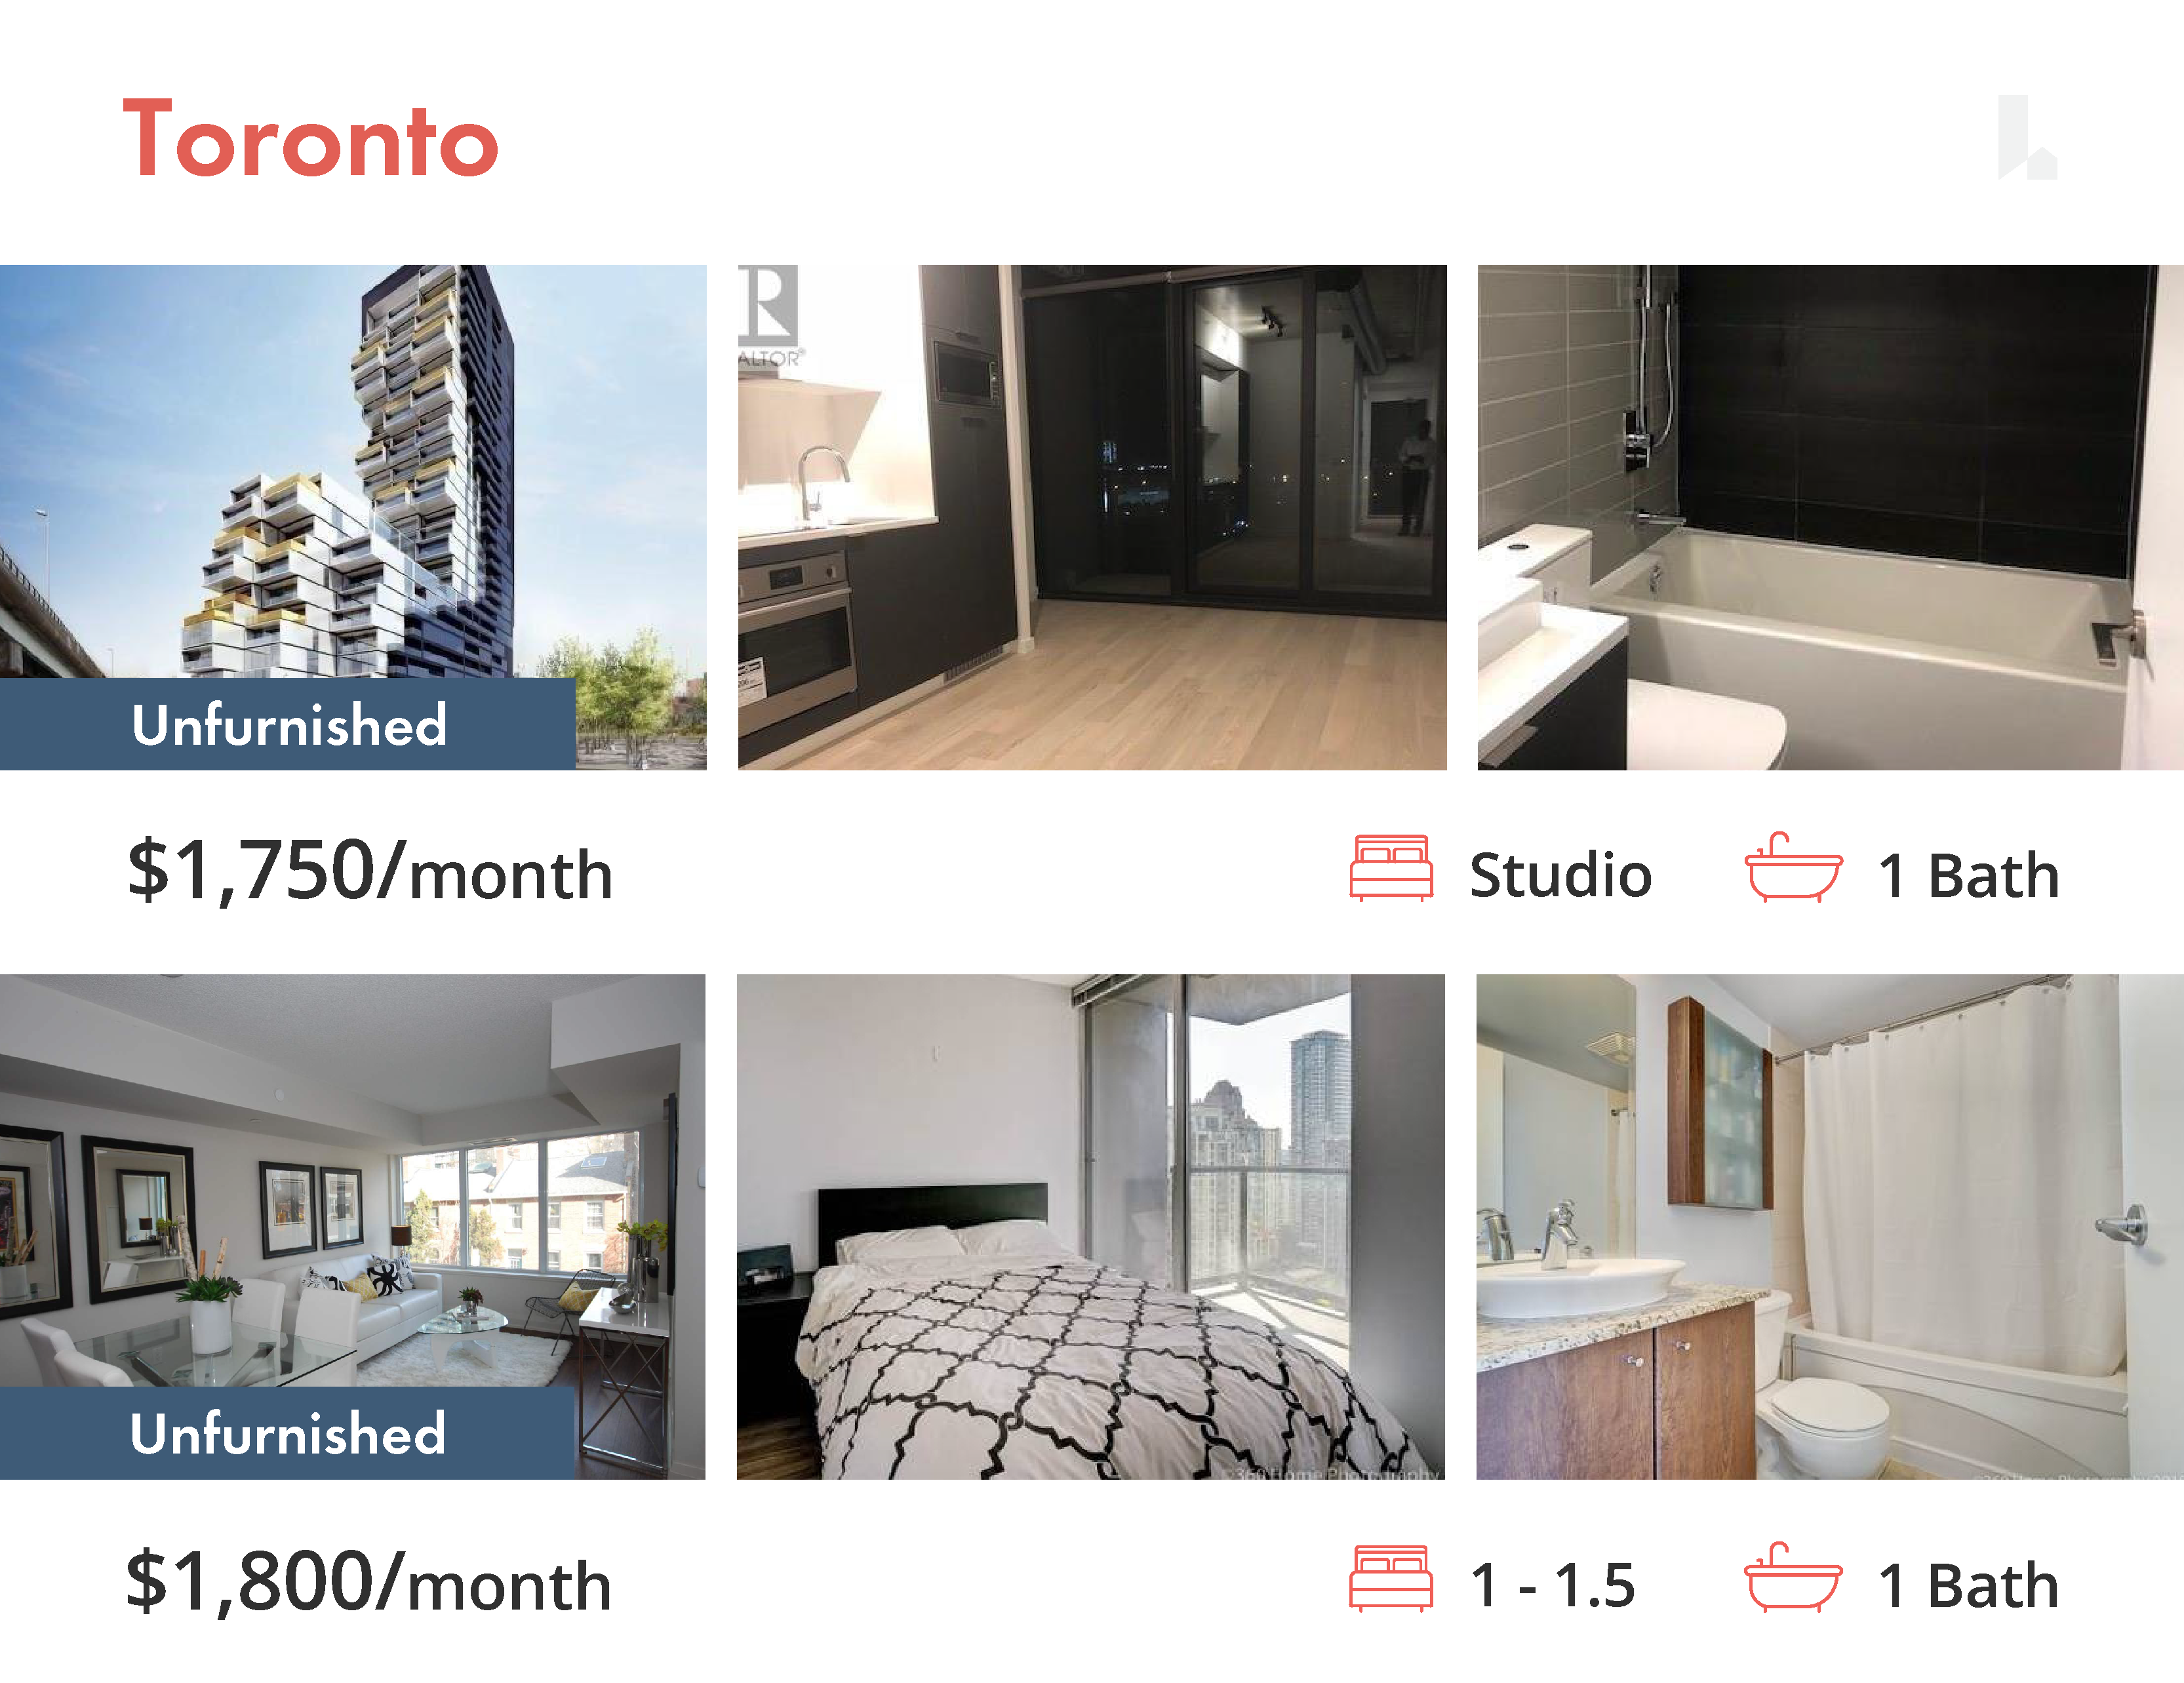 Toronto Apartment Rentals For $1800 Or Less